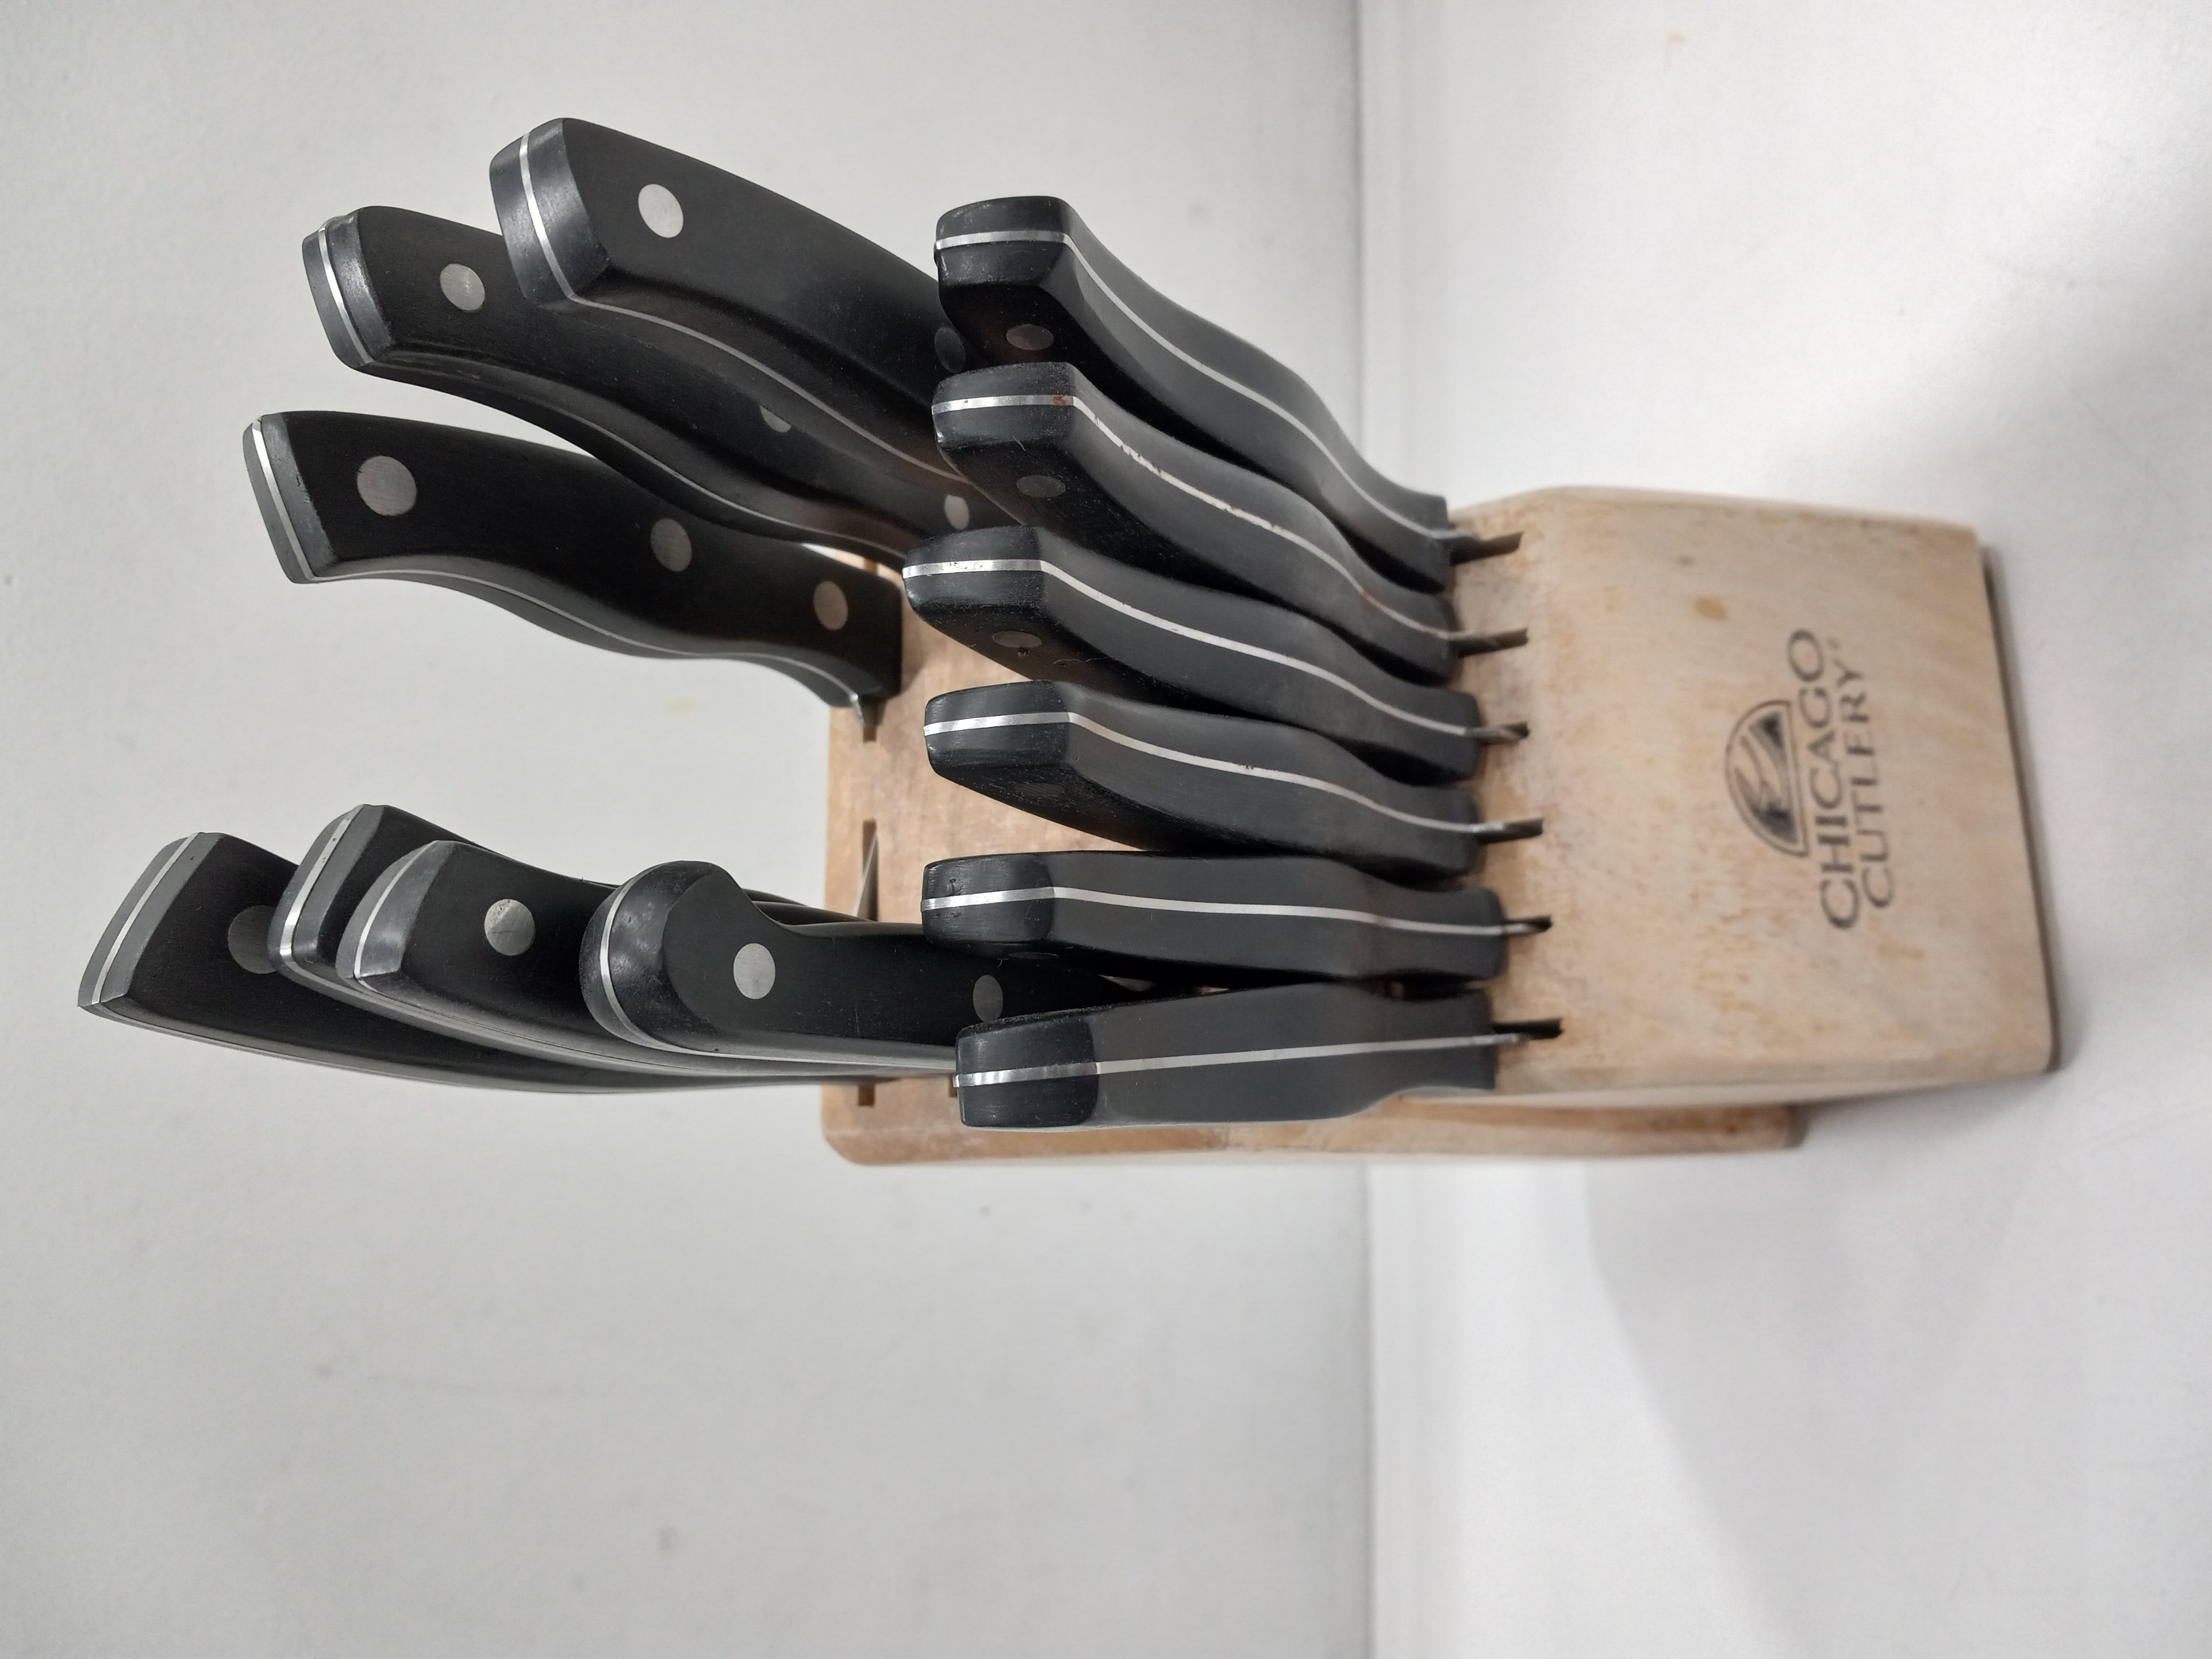 Buy the Chicago Cutlery Knife set In Block